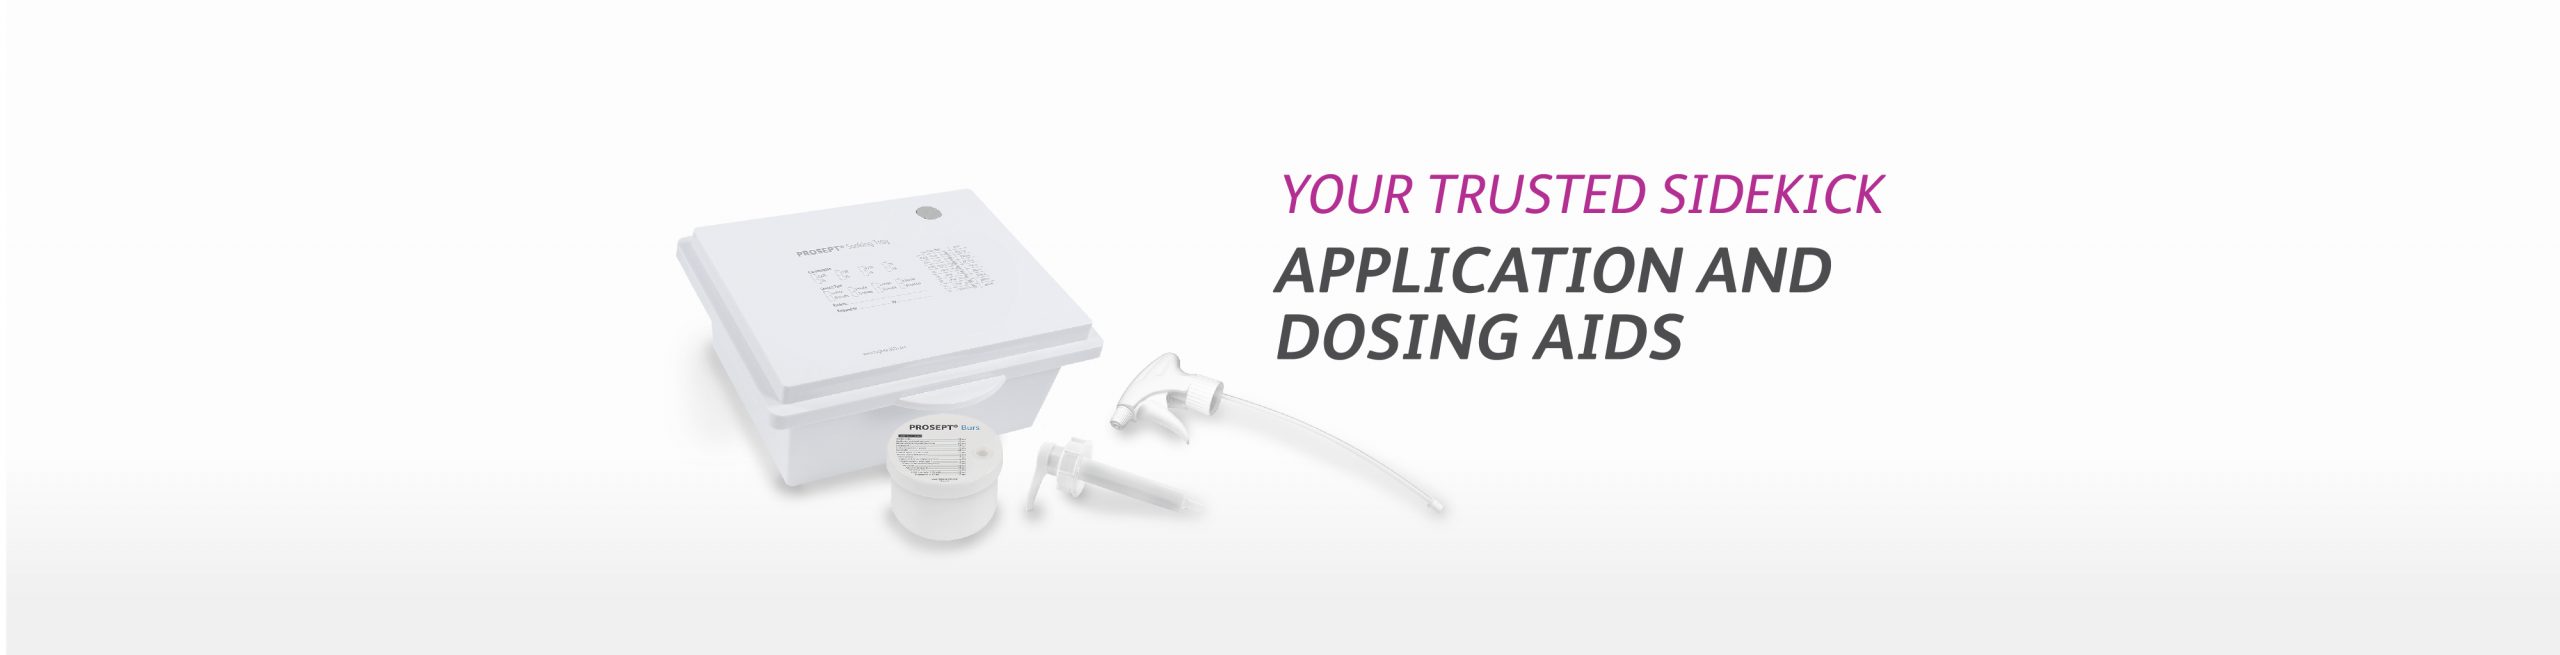 Application and Dosing Aids